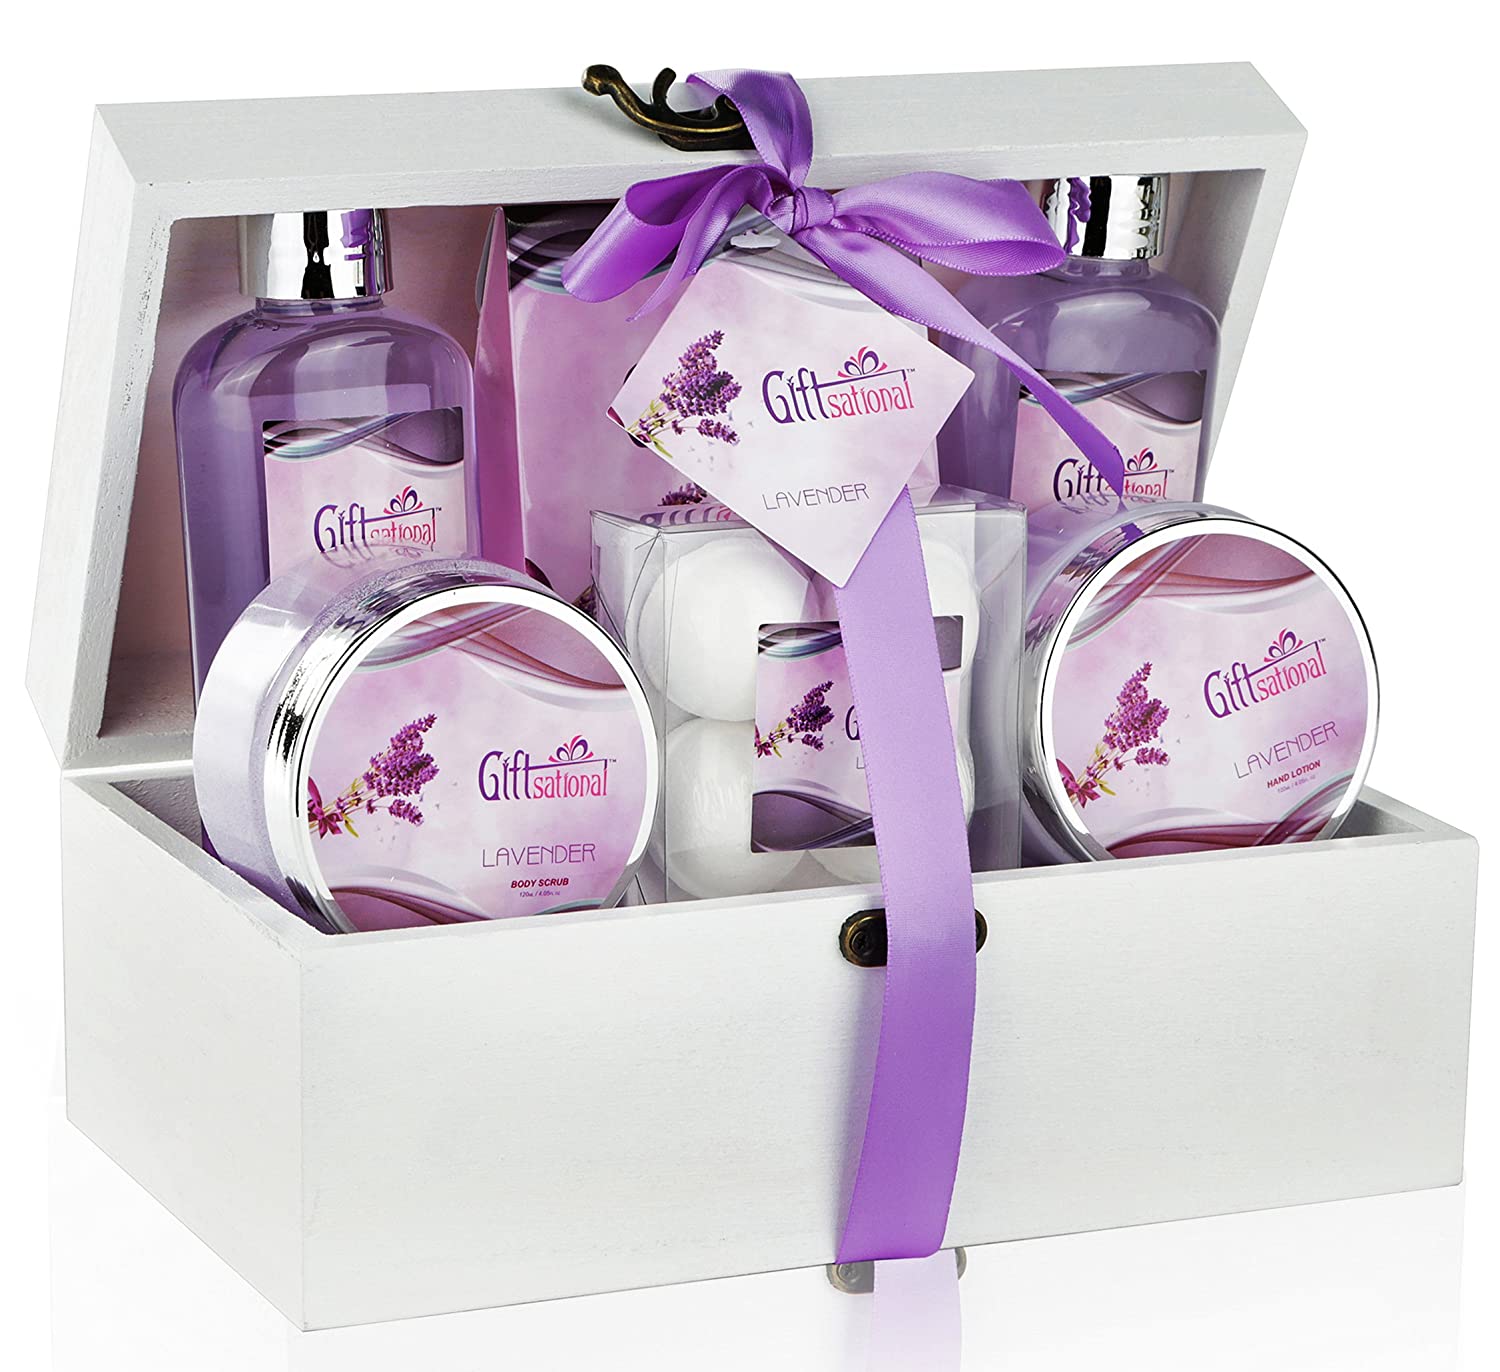 Spa Gift Basket with Sensual Lavender Fragrance, Best Mother's Day, Birthday, Wedding, or Anniversary Gift for Women, Girls, Bath Set Includes Shower Gel, Bubble Bath, Bath Salts, Bath Bombs and More